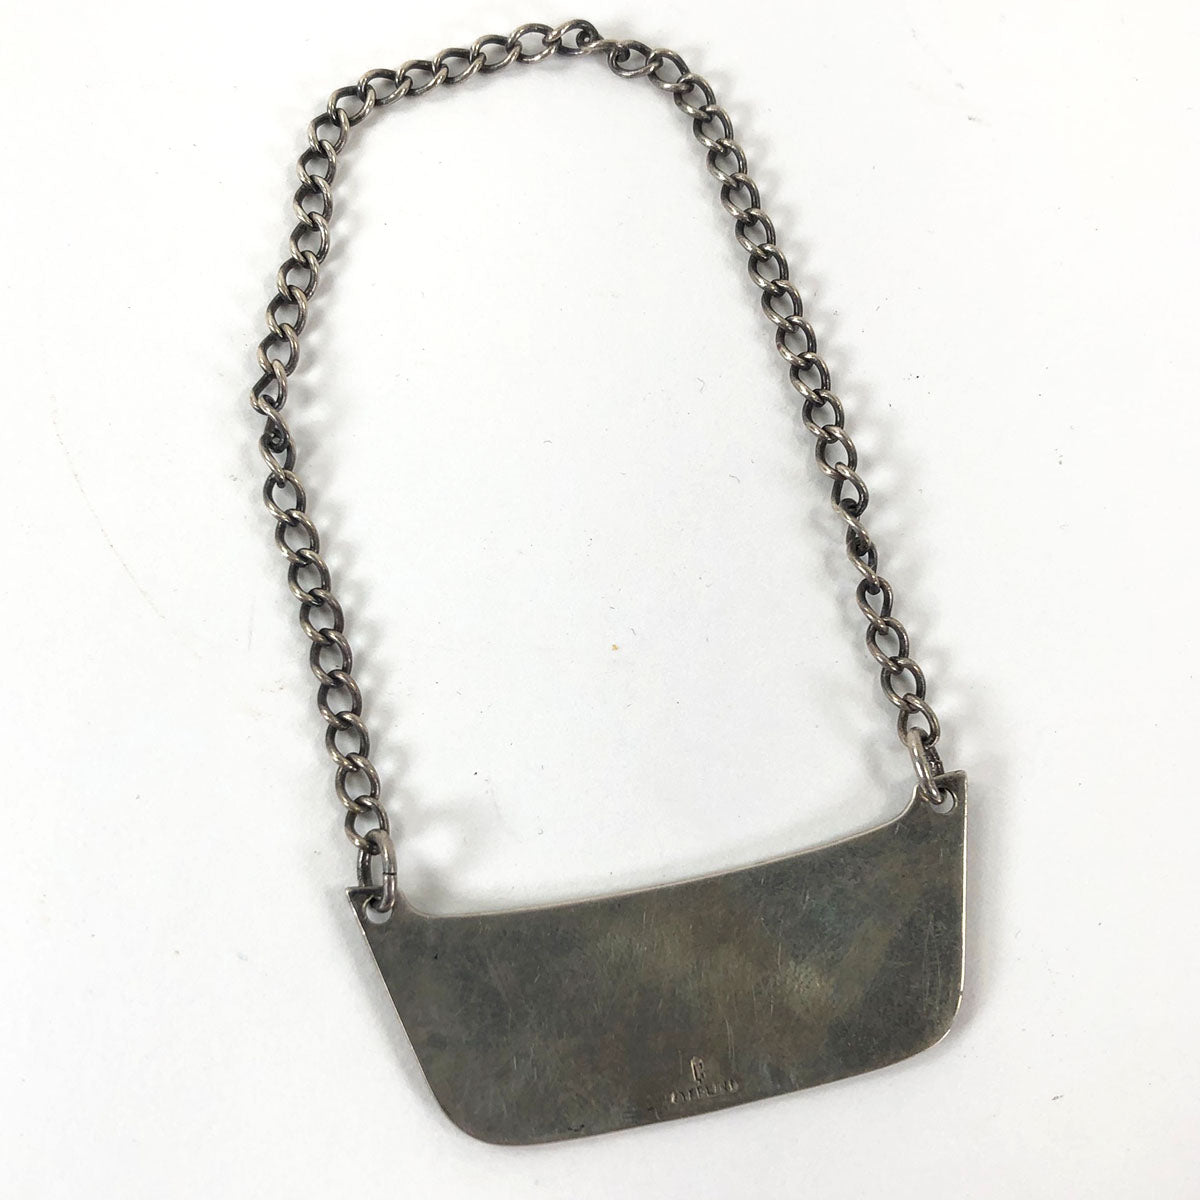 Antique Victorian Sterling Silver Luggage Tag Pendant on 